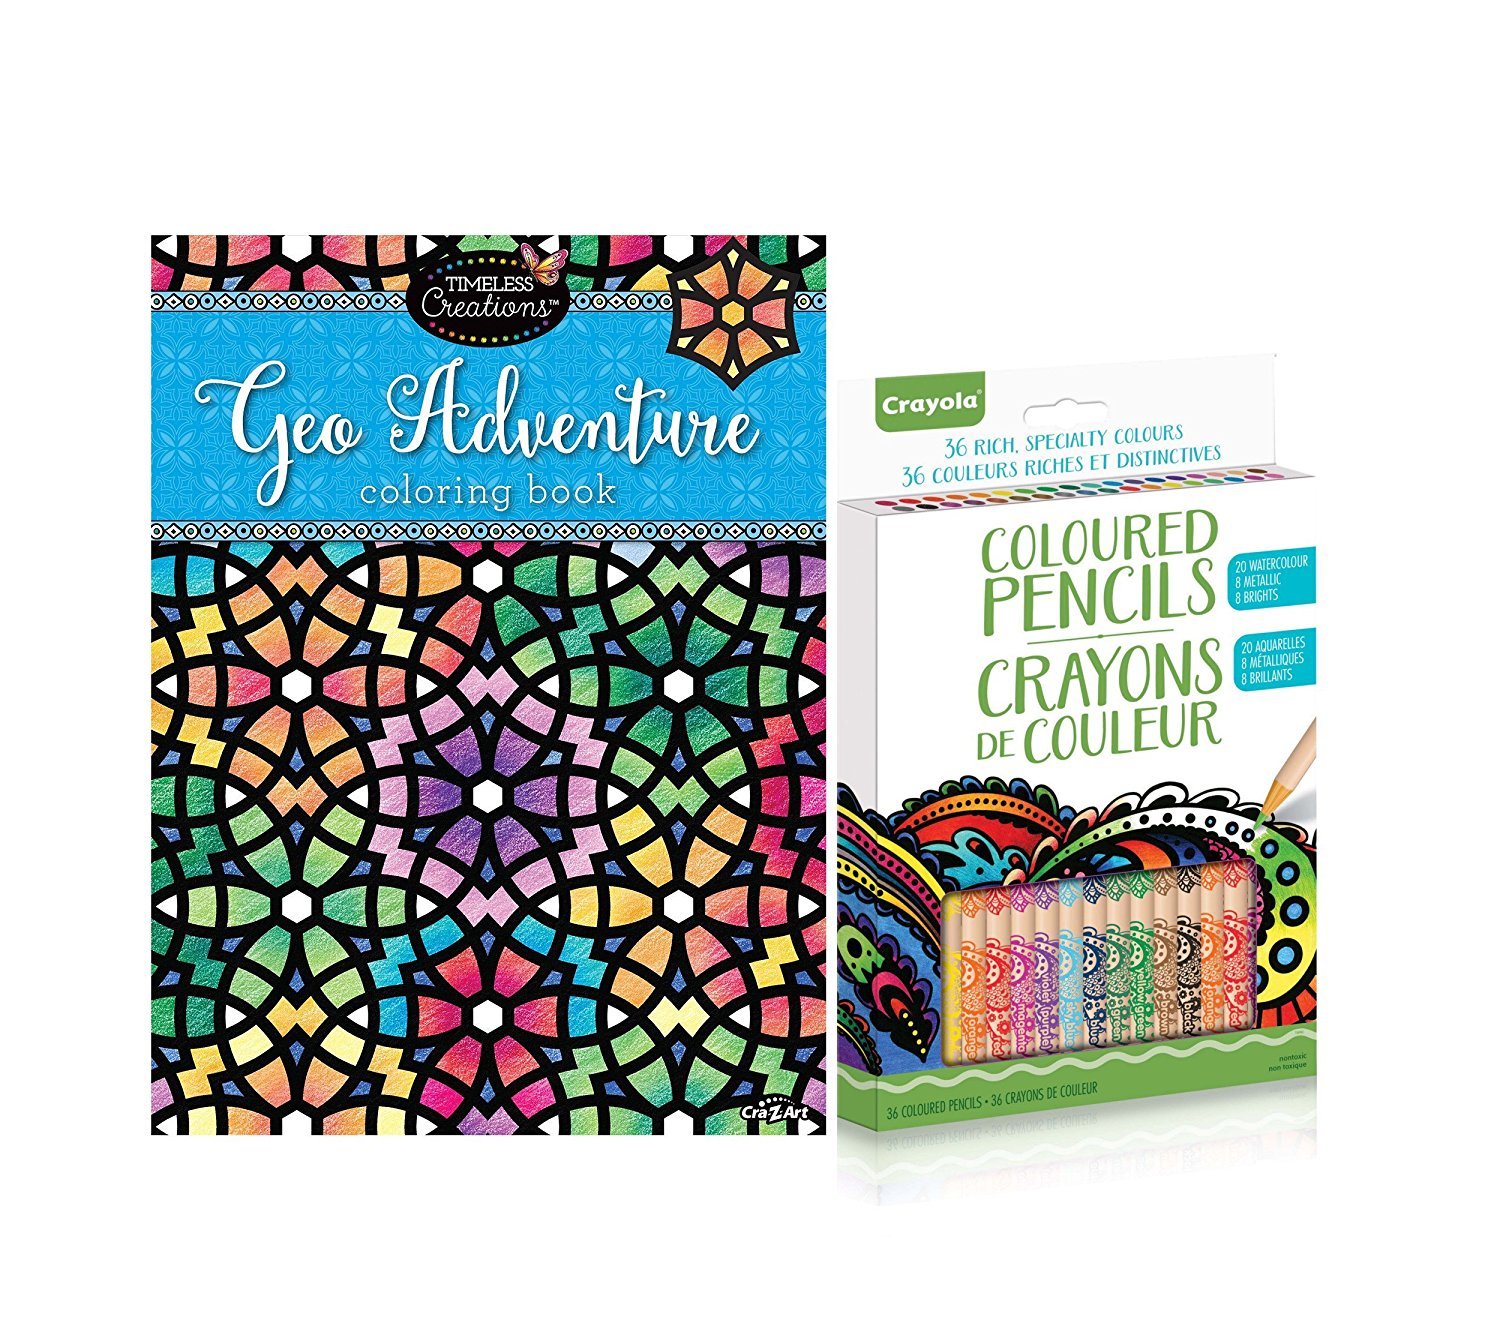 Cra-Z-Art Timeless Creations Adult Coloring Books with 36CT Crayola Aged Up  Color Pencils - SENAME COLOUR